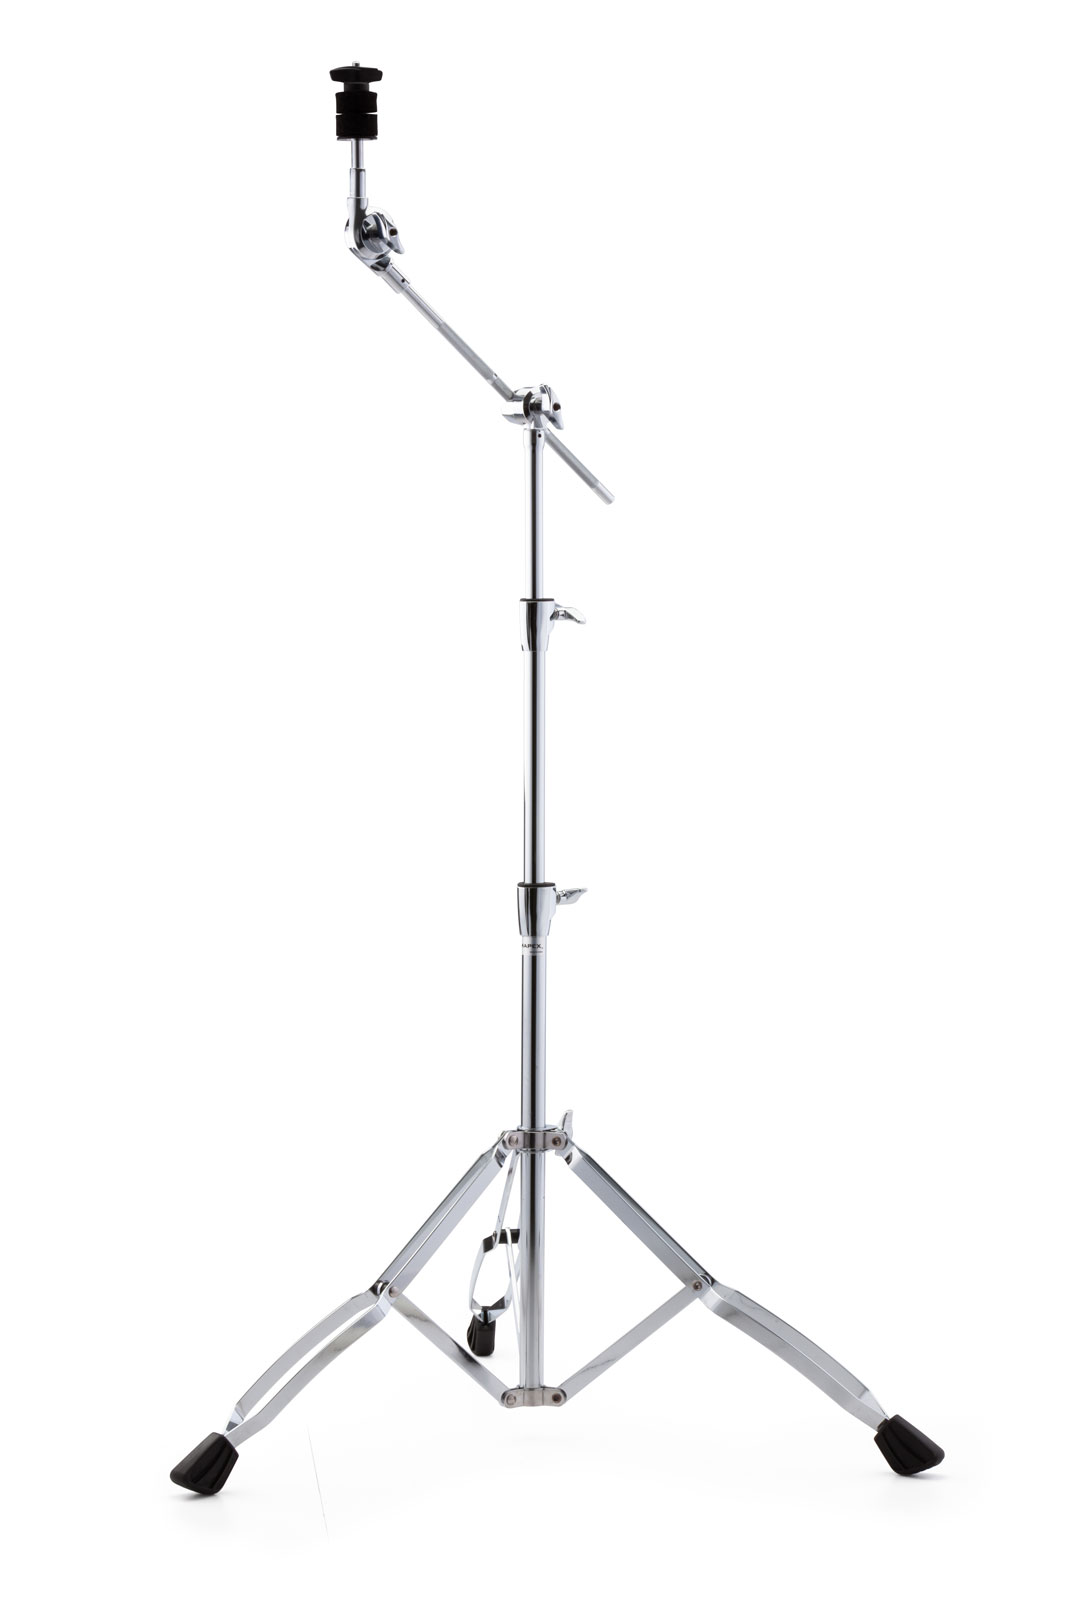 MAPEX B400 - STORM BOOM CYMBAL STAND 